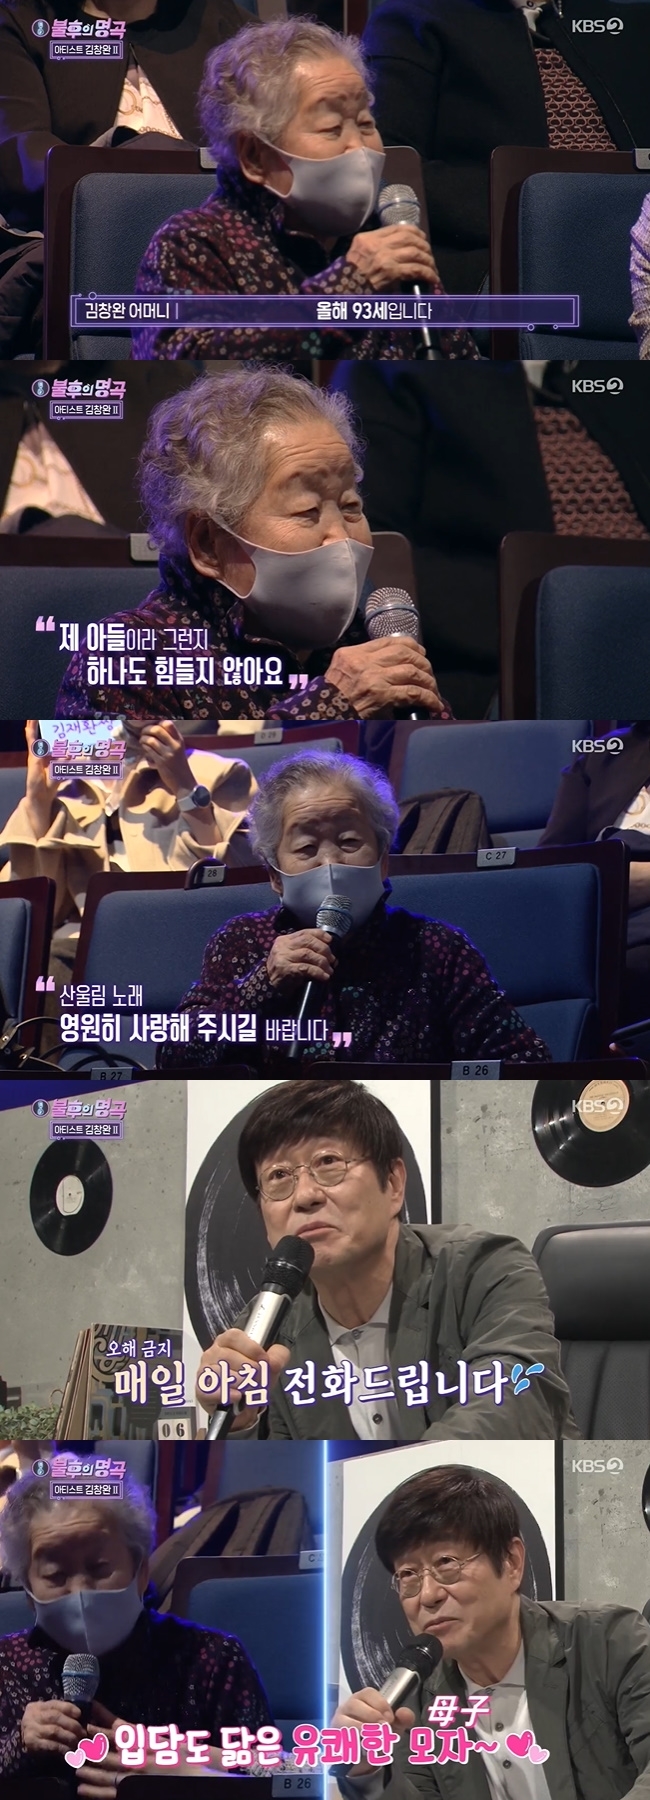 Kim Chang-wans mother watched her son perform at the age of 93 in a Zheng Zheng appearance.On KBS 2TV Immortal Songs: Singing the Legend broadcast on March 26, Kim Chang-wans two parts were held.On this day, Kim Jae-hwan enthusiastically sang Sanulims remembrance in front of his parents.Kim Chang-wan praised (seeing Kim Jae-hwans stage) I thought that the song is a frame that contains memories.An interview with Kim Chang-wans mother, who is 93 years old this year, was also made public after Kim Jae-hwans parents were introduced.Kim Chang-wans mother, who sat in the audience with Zheng Zhengs appearance and watched her sons performance, said, It is not hard to say that it is my son.I hope you love the song of Sanulim forever. I hear my sons performance and I hear his voice. Kim Chang-wan added, My sons voice pretends to listen for a long time, but I call every morning.Lee said, Thank you mother, I hope you will be together until the end. However, my mother continued, Everyone is healthy.Kim Chang-wan said, Mom, stop it.